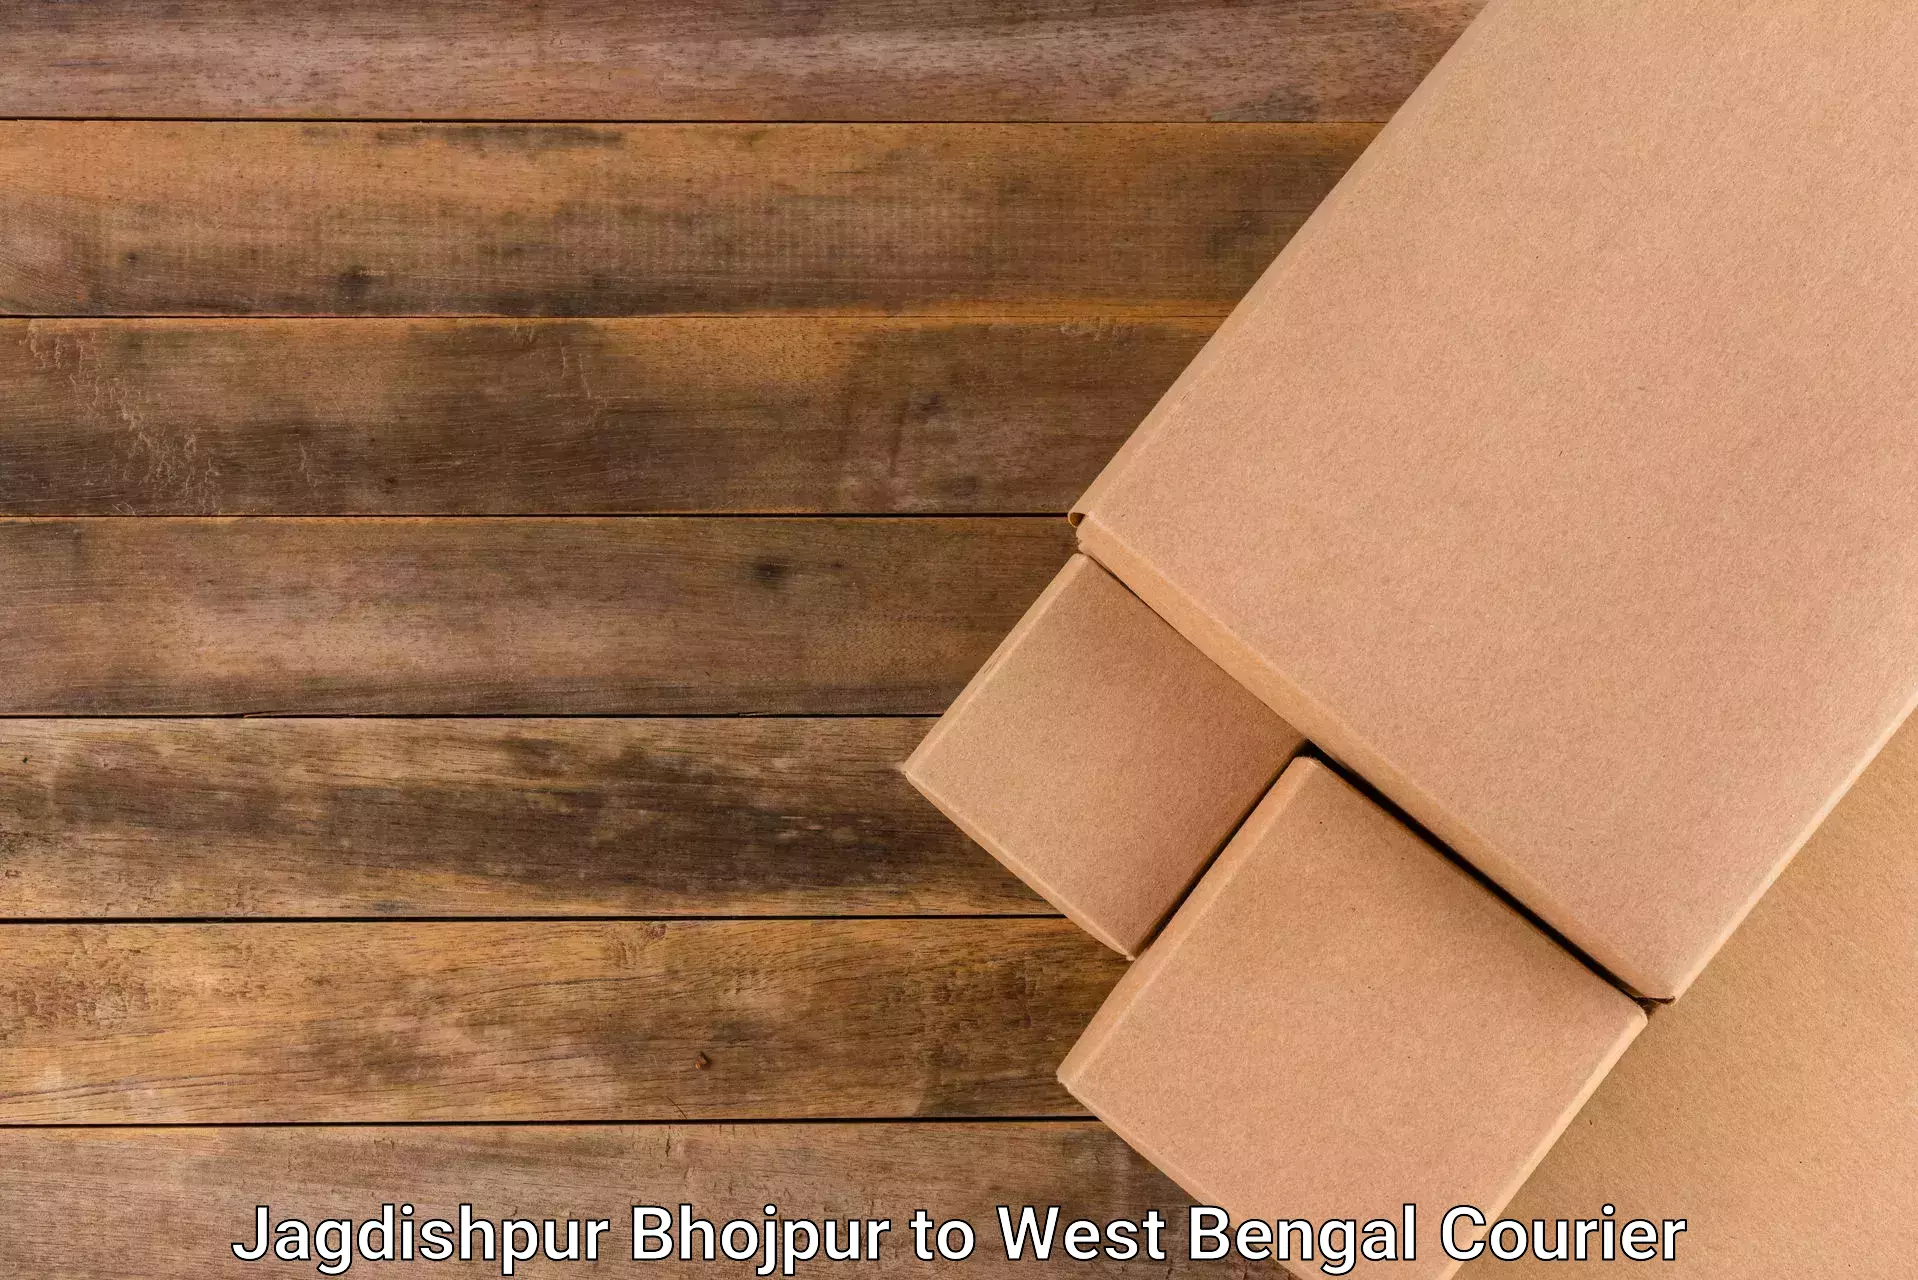 Advanced package delivery Jagdishpur Bhojpur to West Bengal